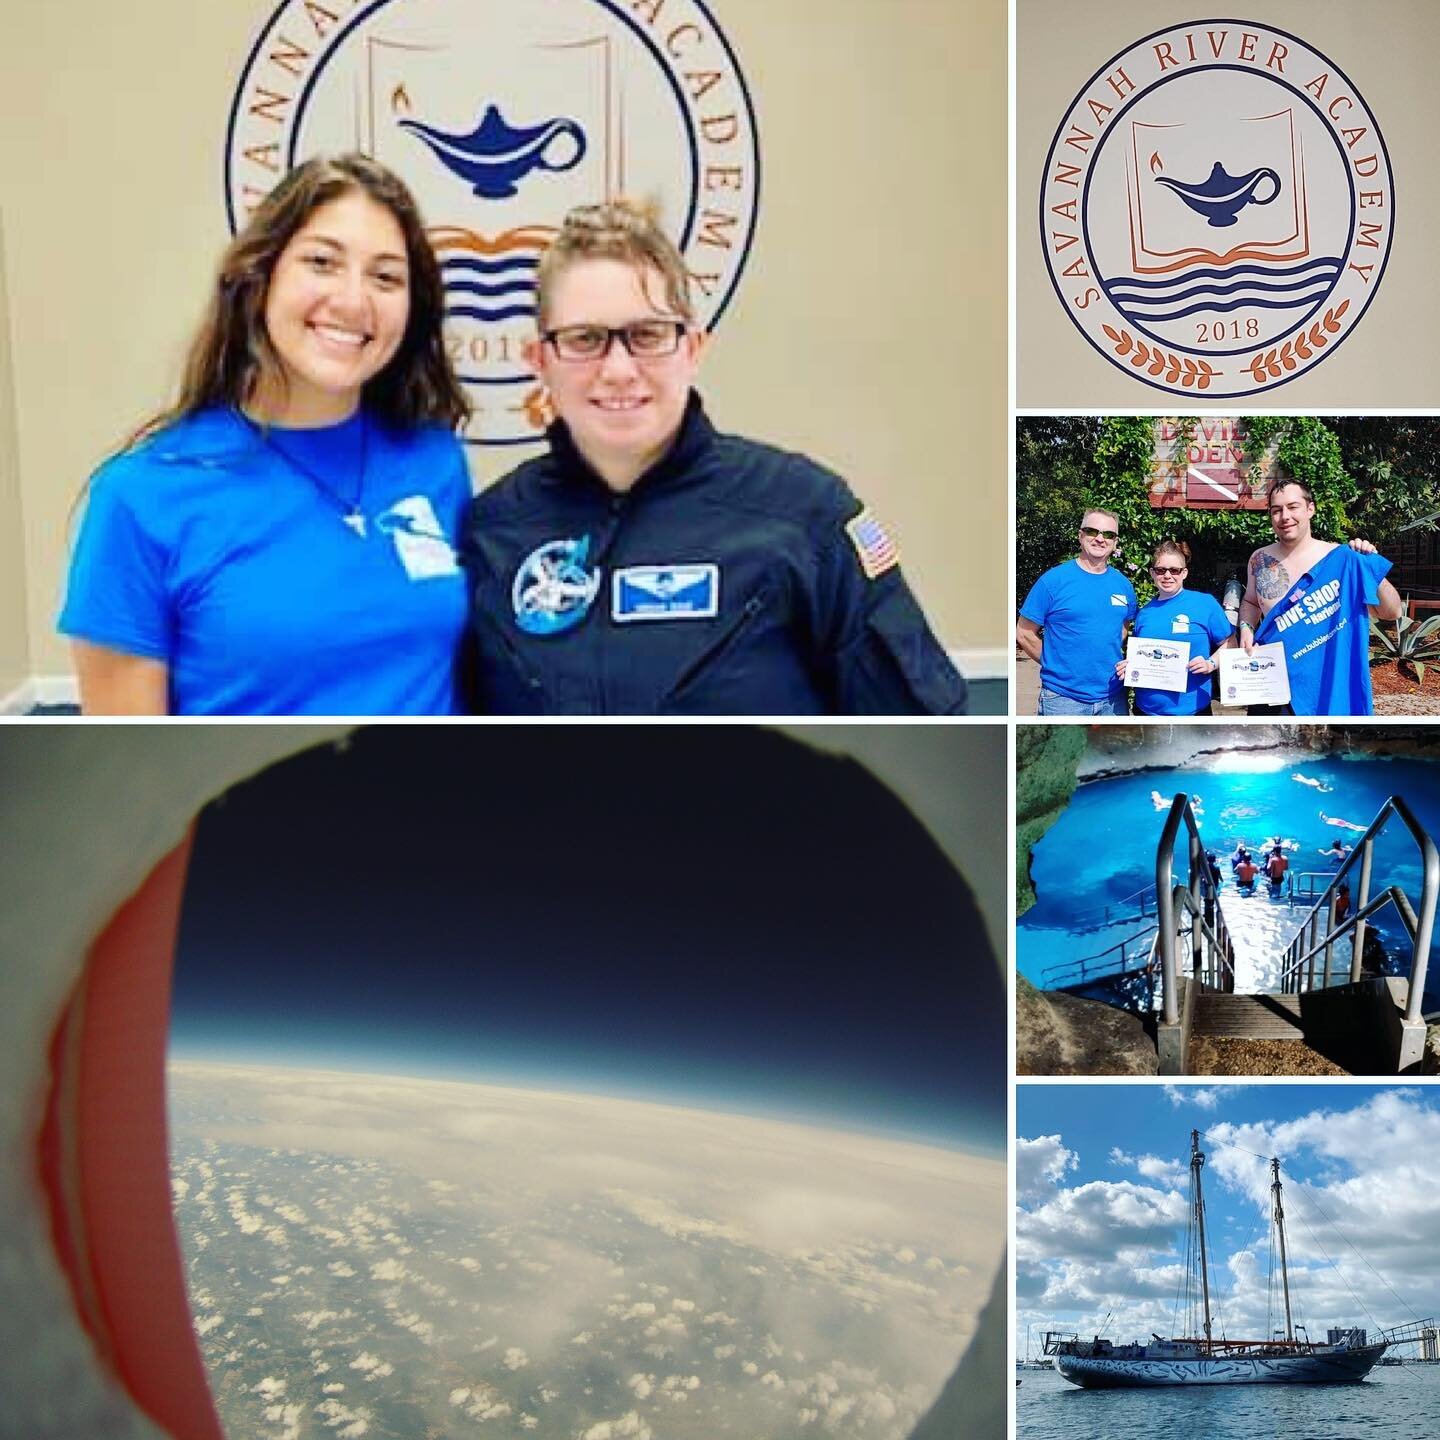 Summary photo of my most recent blog post! All the cool things I&rsquo;ve been up to in the Amazing month of May! From learning to dive to launching weather balloons with the kids from Savannah River Academy and NOAA to preparing to set out on an oce